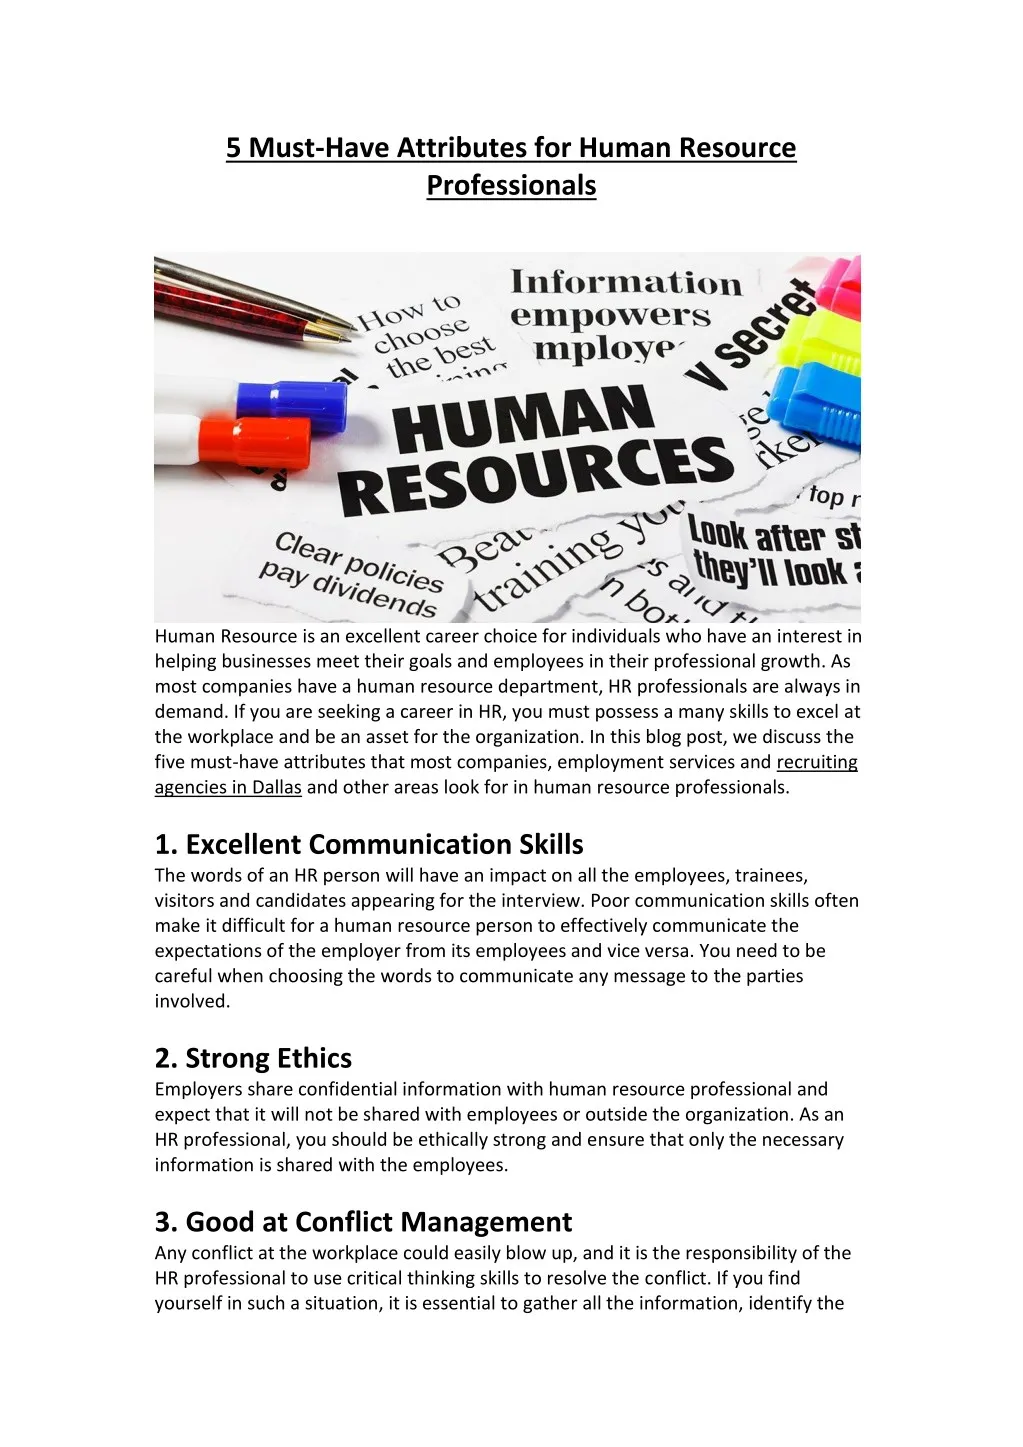 5 must have attributes for human resource